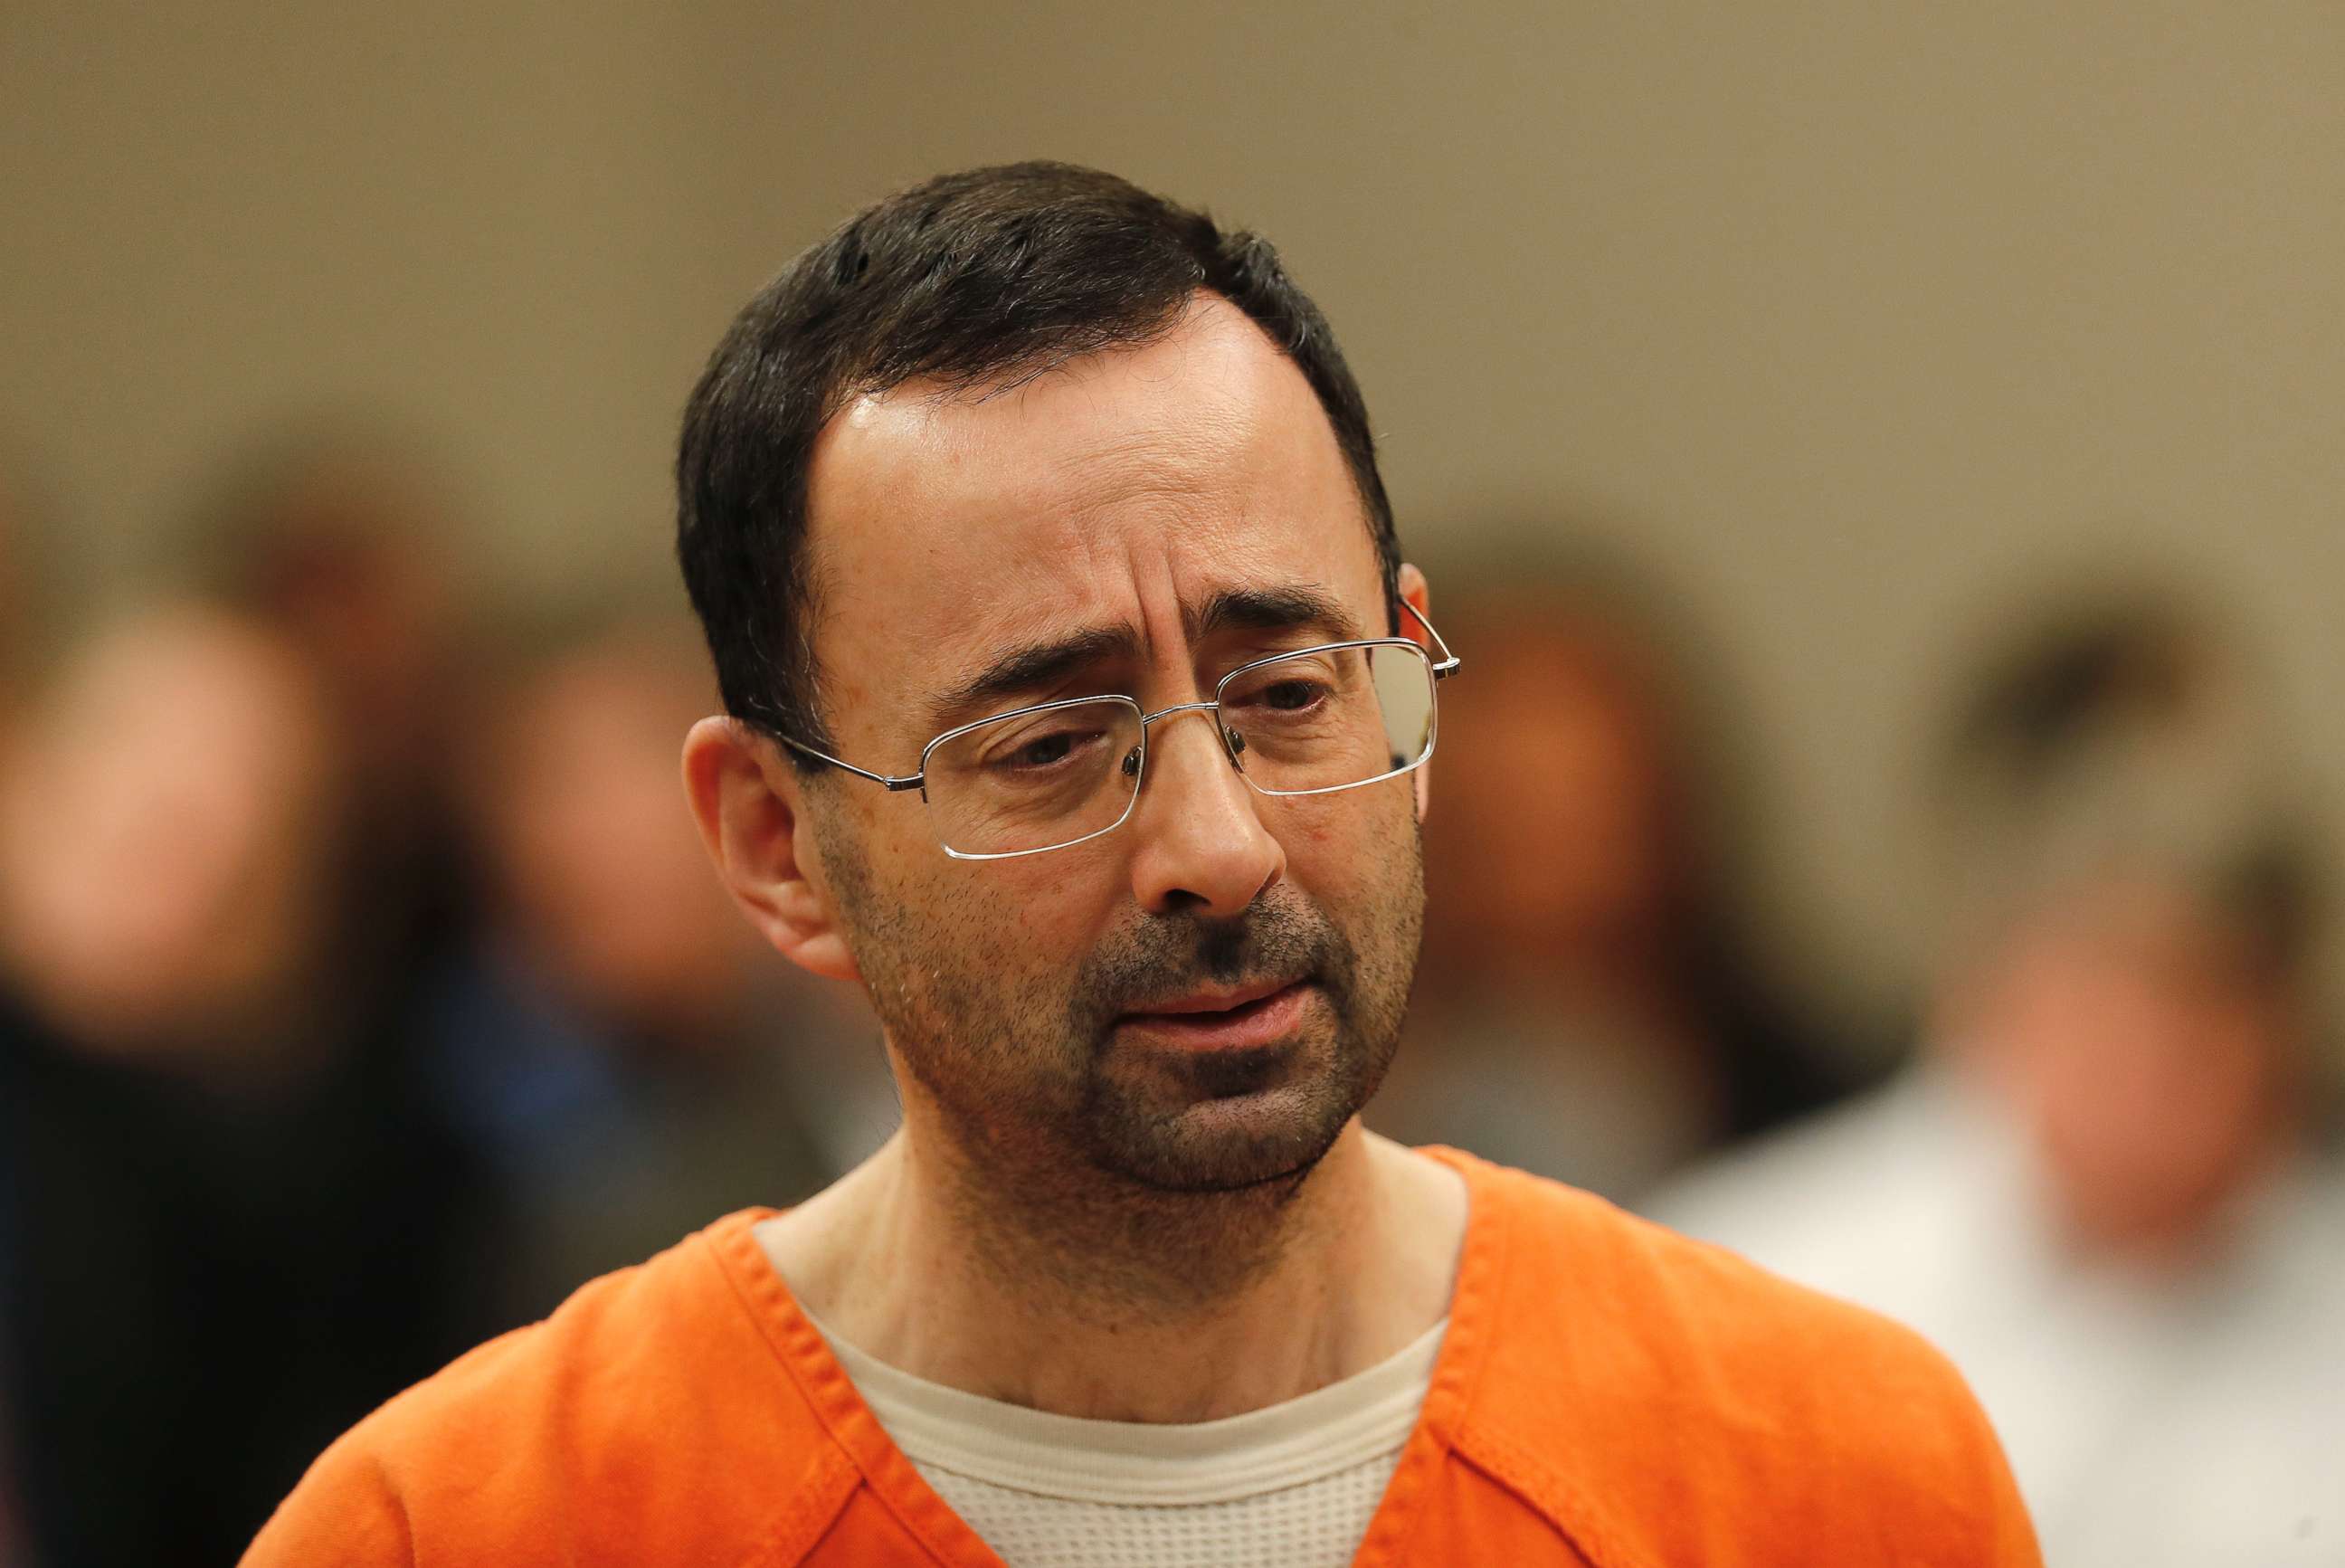 PHOTO: Dr. Larry Nassar, 54, a sports doctor accused of molesting girls while working for USA Gymnastics and Michigan State University, appears in court for a plea hearing in Lansing, Mich., Nov. 22, 2017.